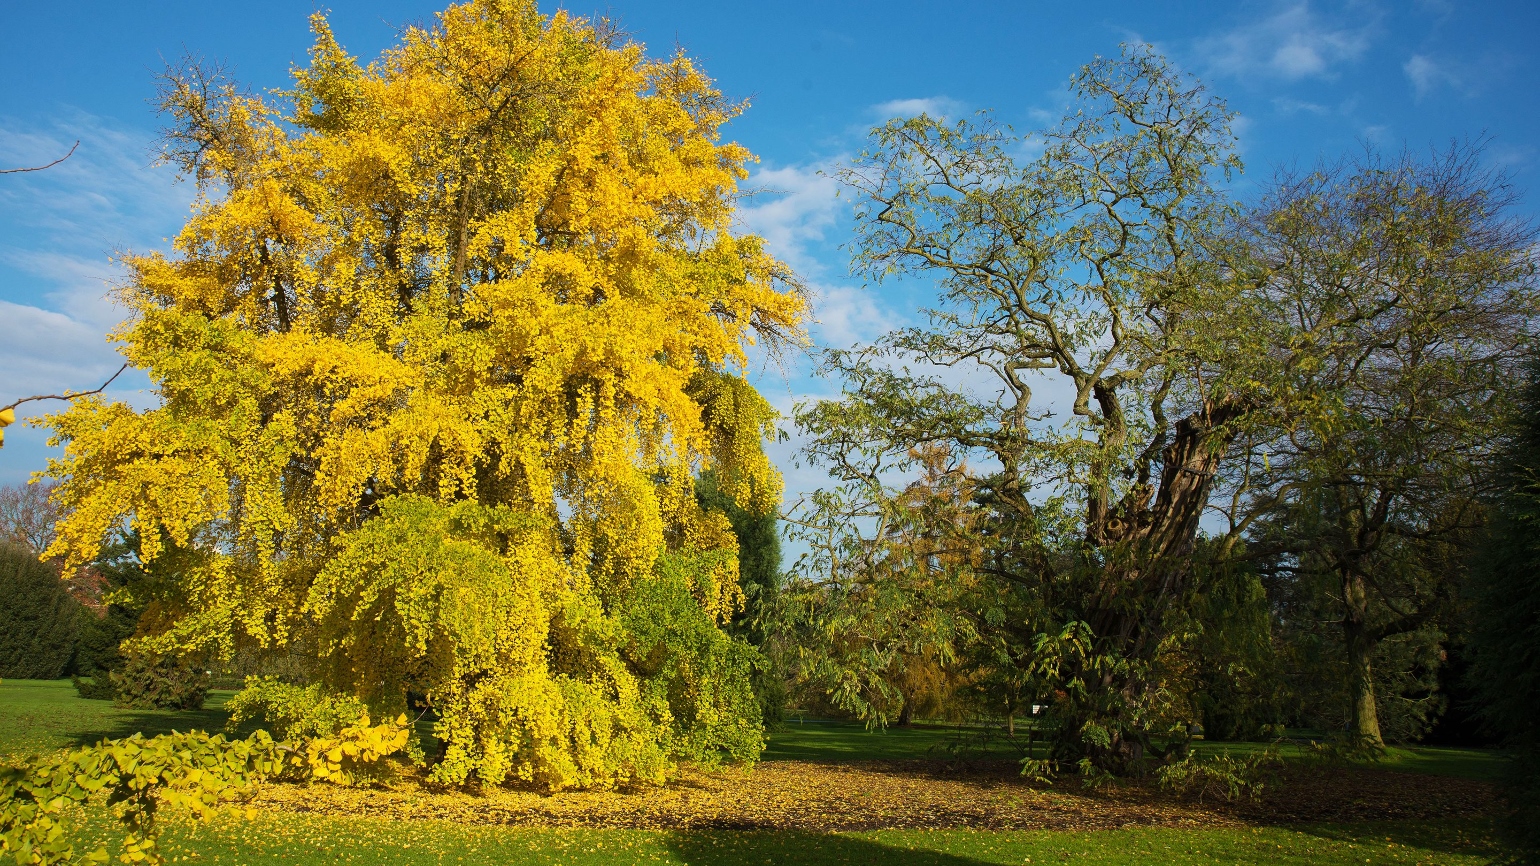 Full maidenhair tree with yellow leaves in autumn